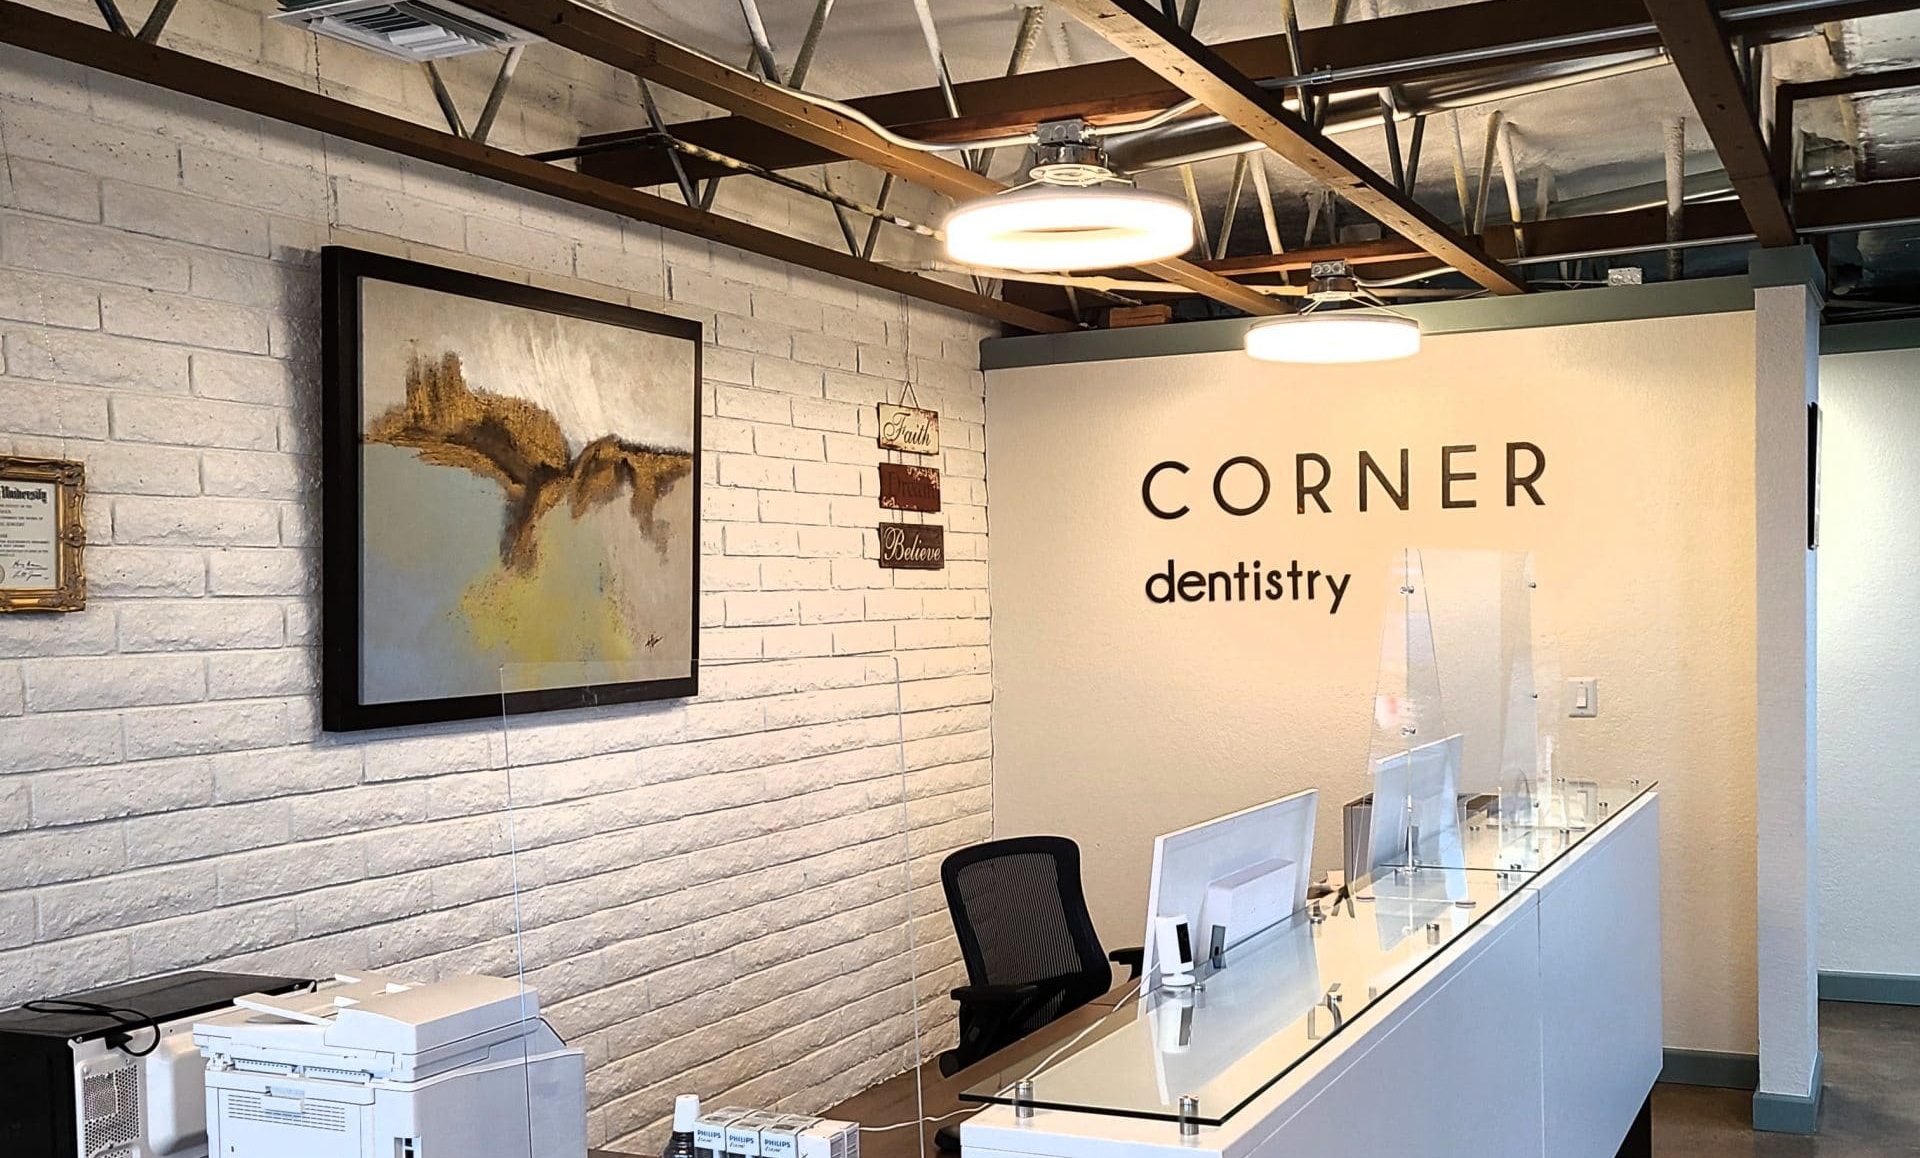 Our New Name: Introducing Corner Dentistry